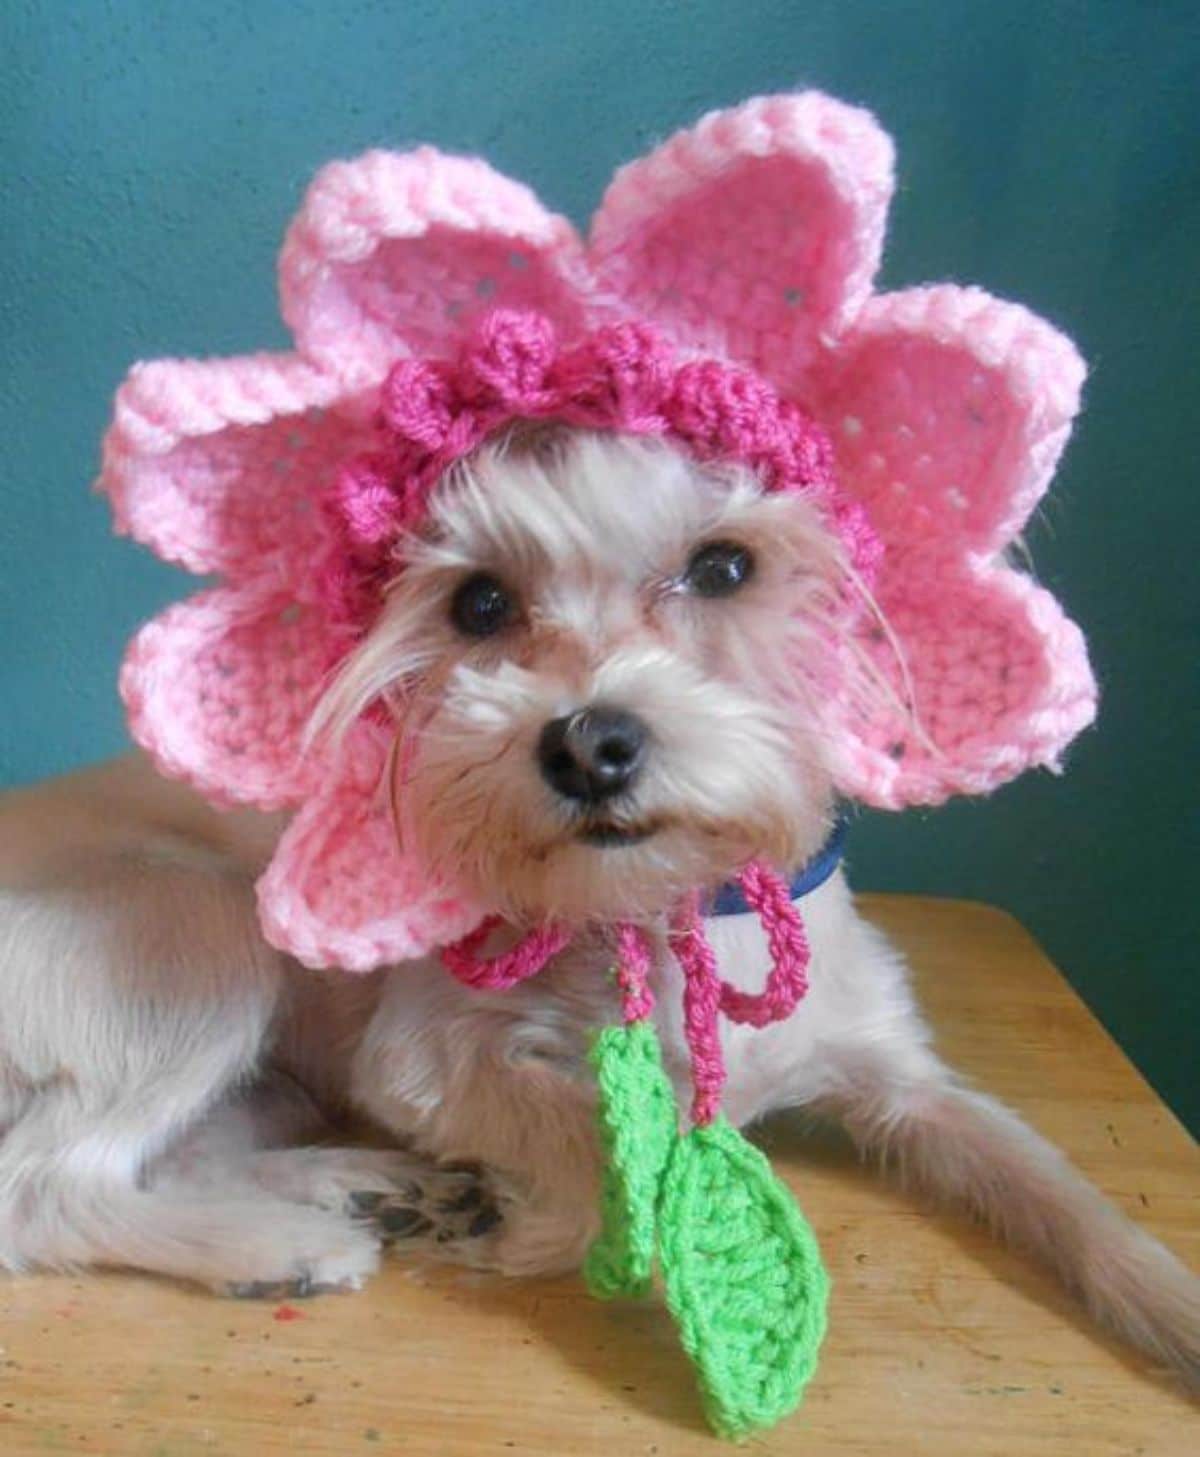 small white fluffy dog wearing a pink flower crocheted hat with large petals behind the head